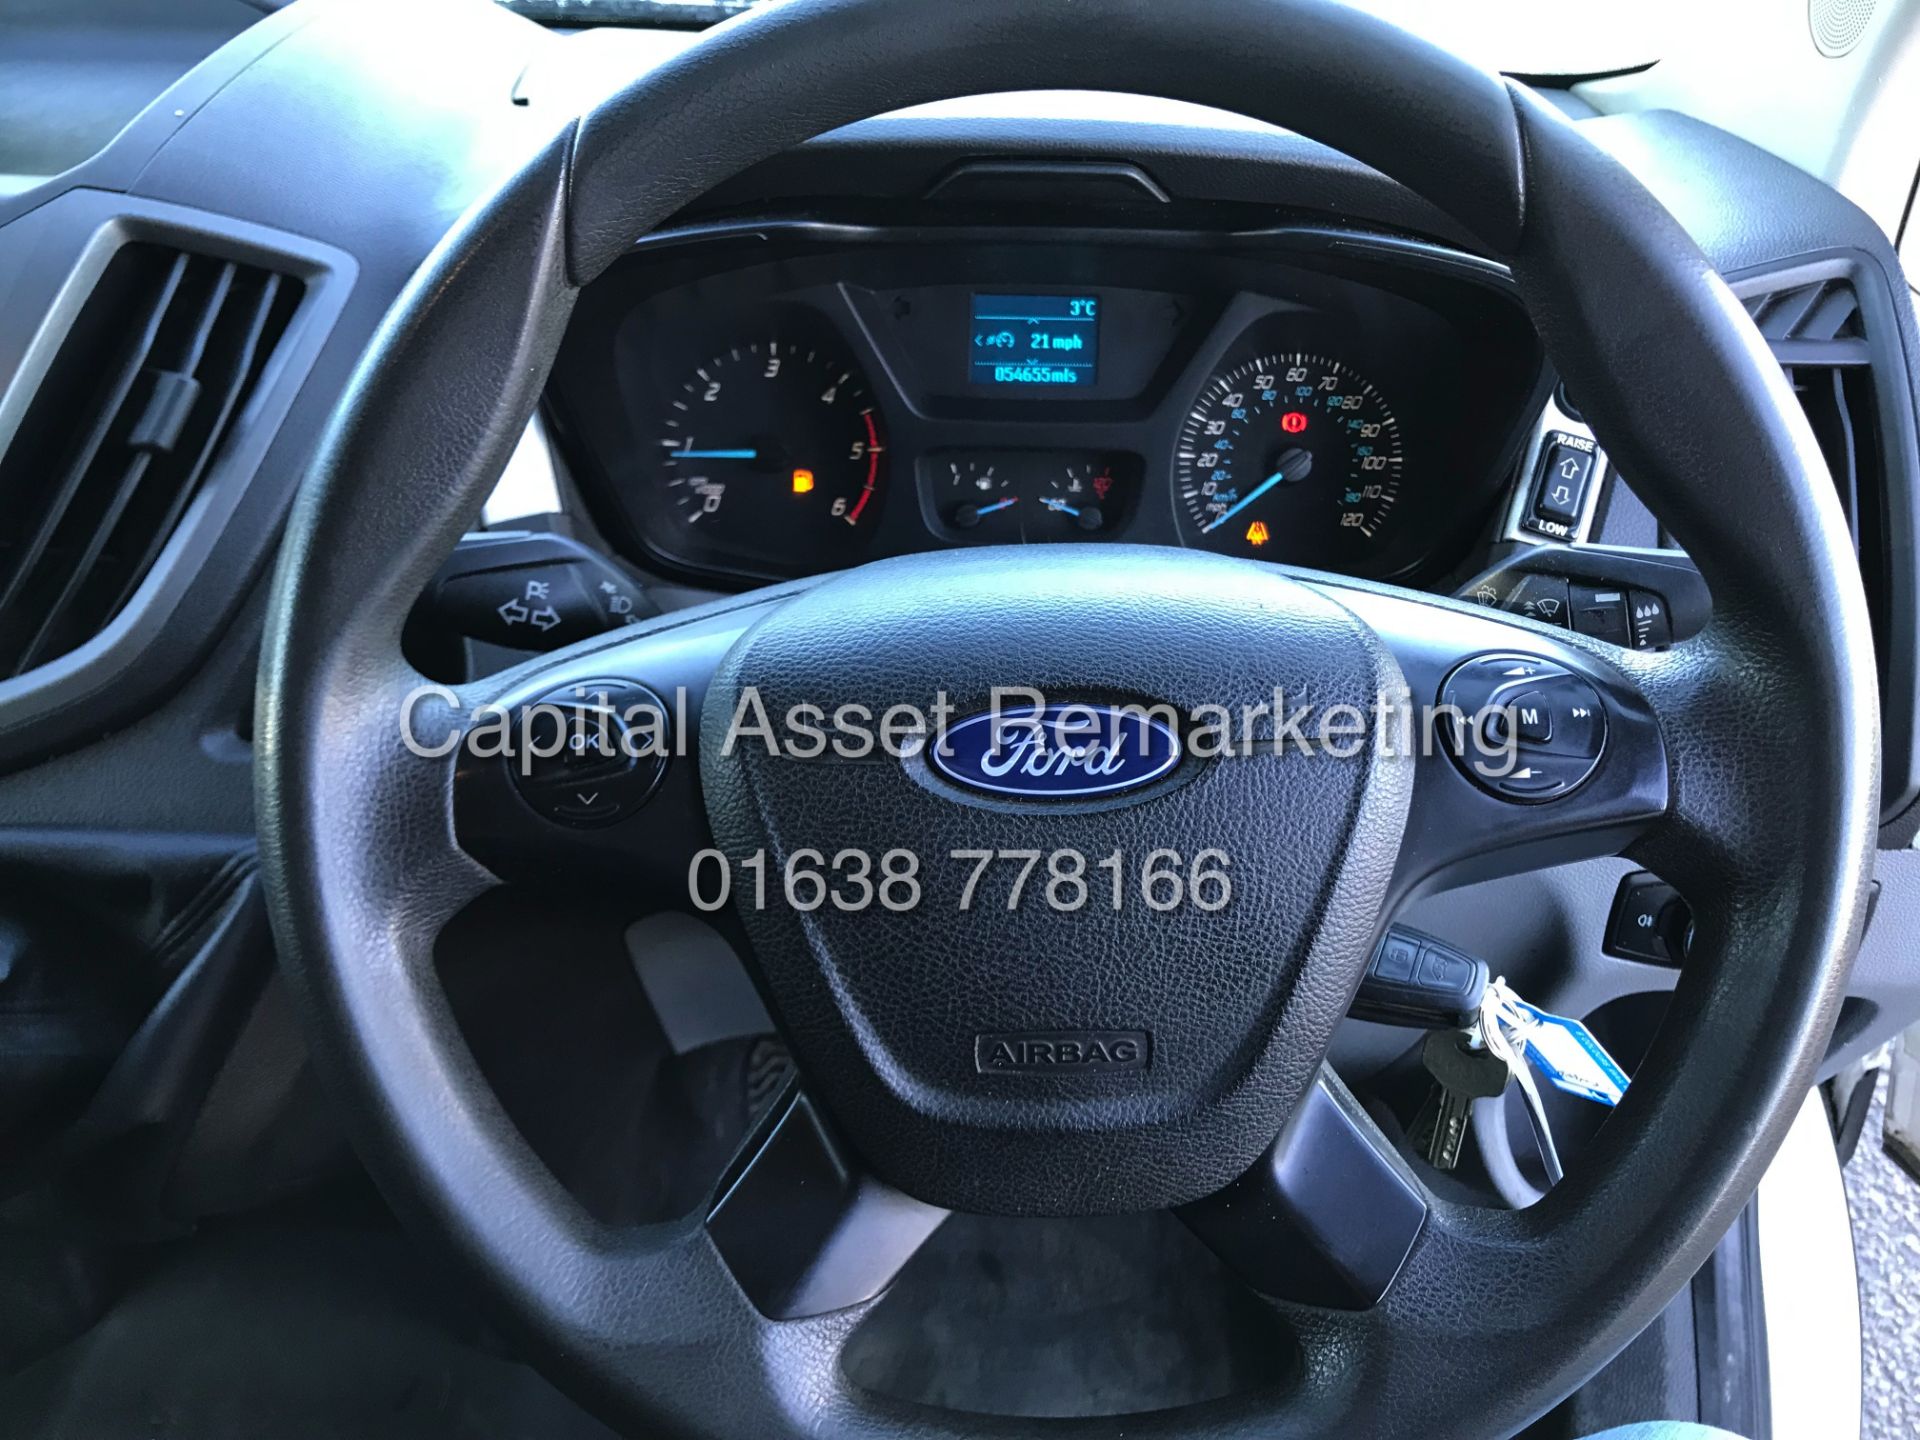 (ON SALE) FORD TRASNIT 2.2TDCI "125BHP - 6 SPEED" T350 D/C "TIPPER" (16 REG) 1 OWNER - LOW MILEAGE - Image 9 of 13